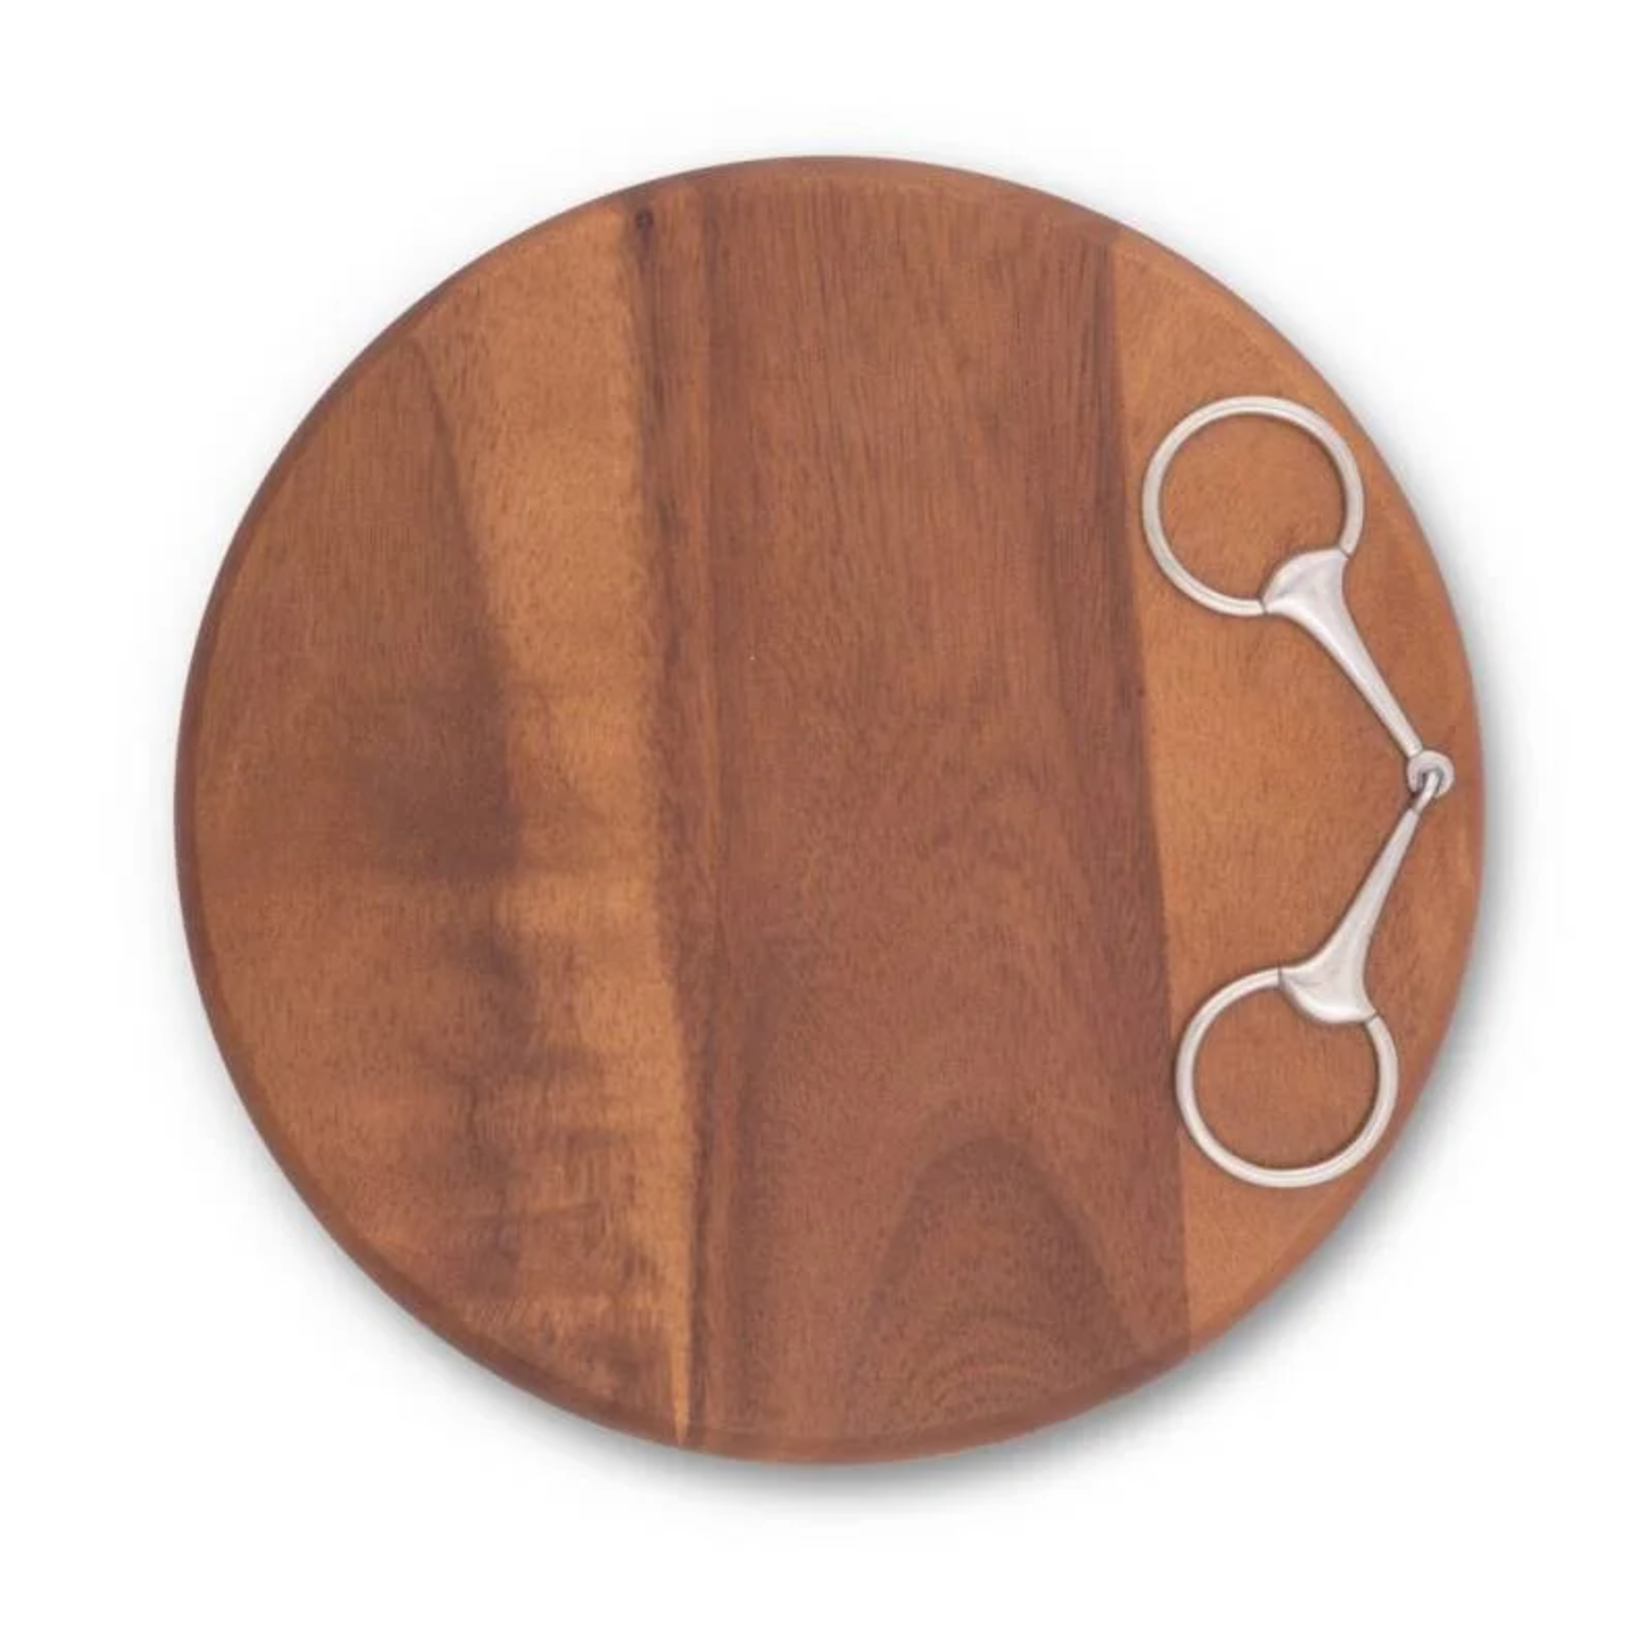 Horses and Lifestyle Equestrian wooden server plate